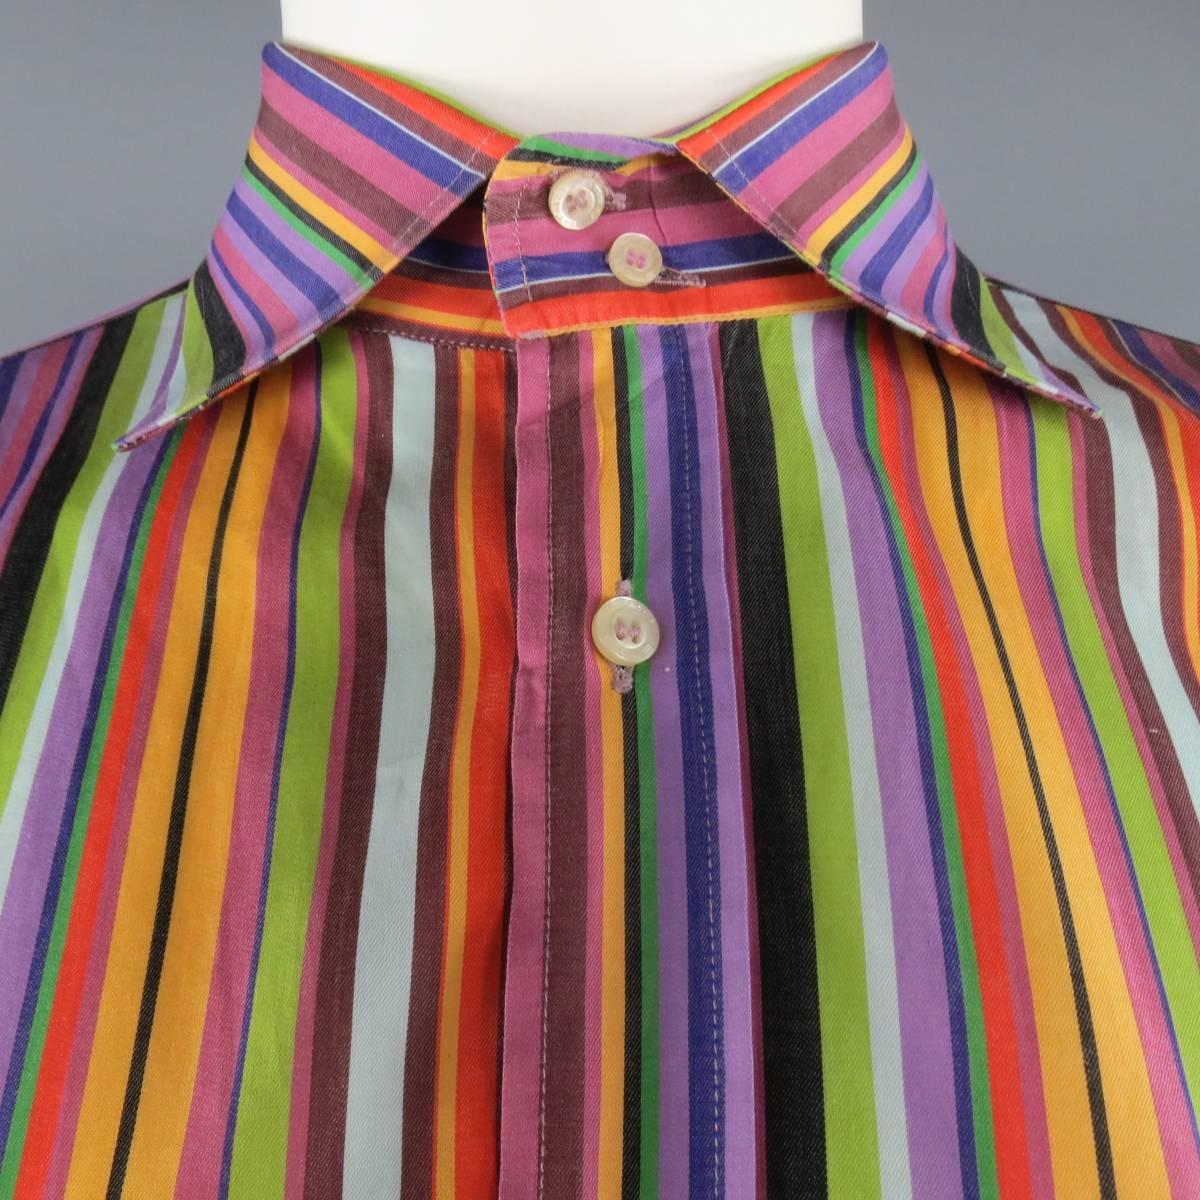 ETRO dress shirt in a multi color modern rainbow striped cotton with a pointed spread collar. Small spot on back. As-Is. Made in Italy.
 
Good Pre-Owned Condition.
Marked: IT 46
 
Measurements:
 
Shoulder: 20 in.
Chest: 56 in.
Sleeve: 25.5